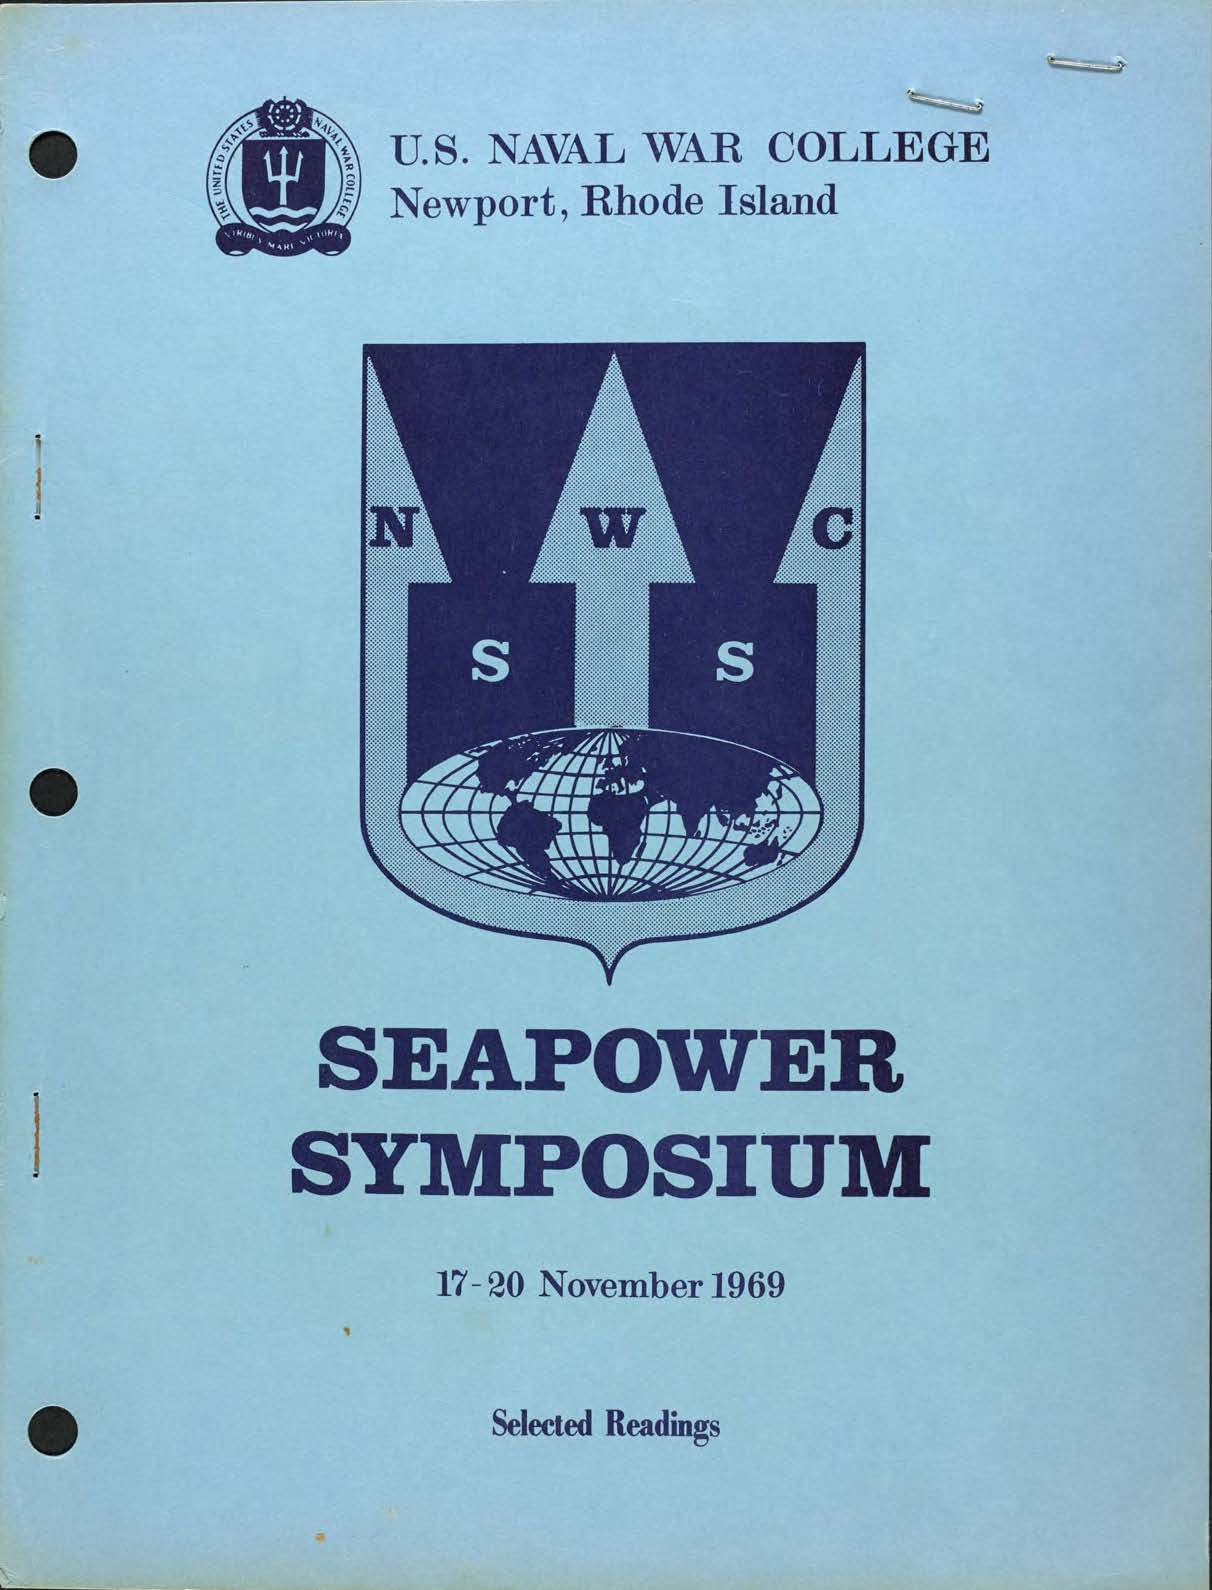 Selected readings: First Seapower Symposium